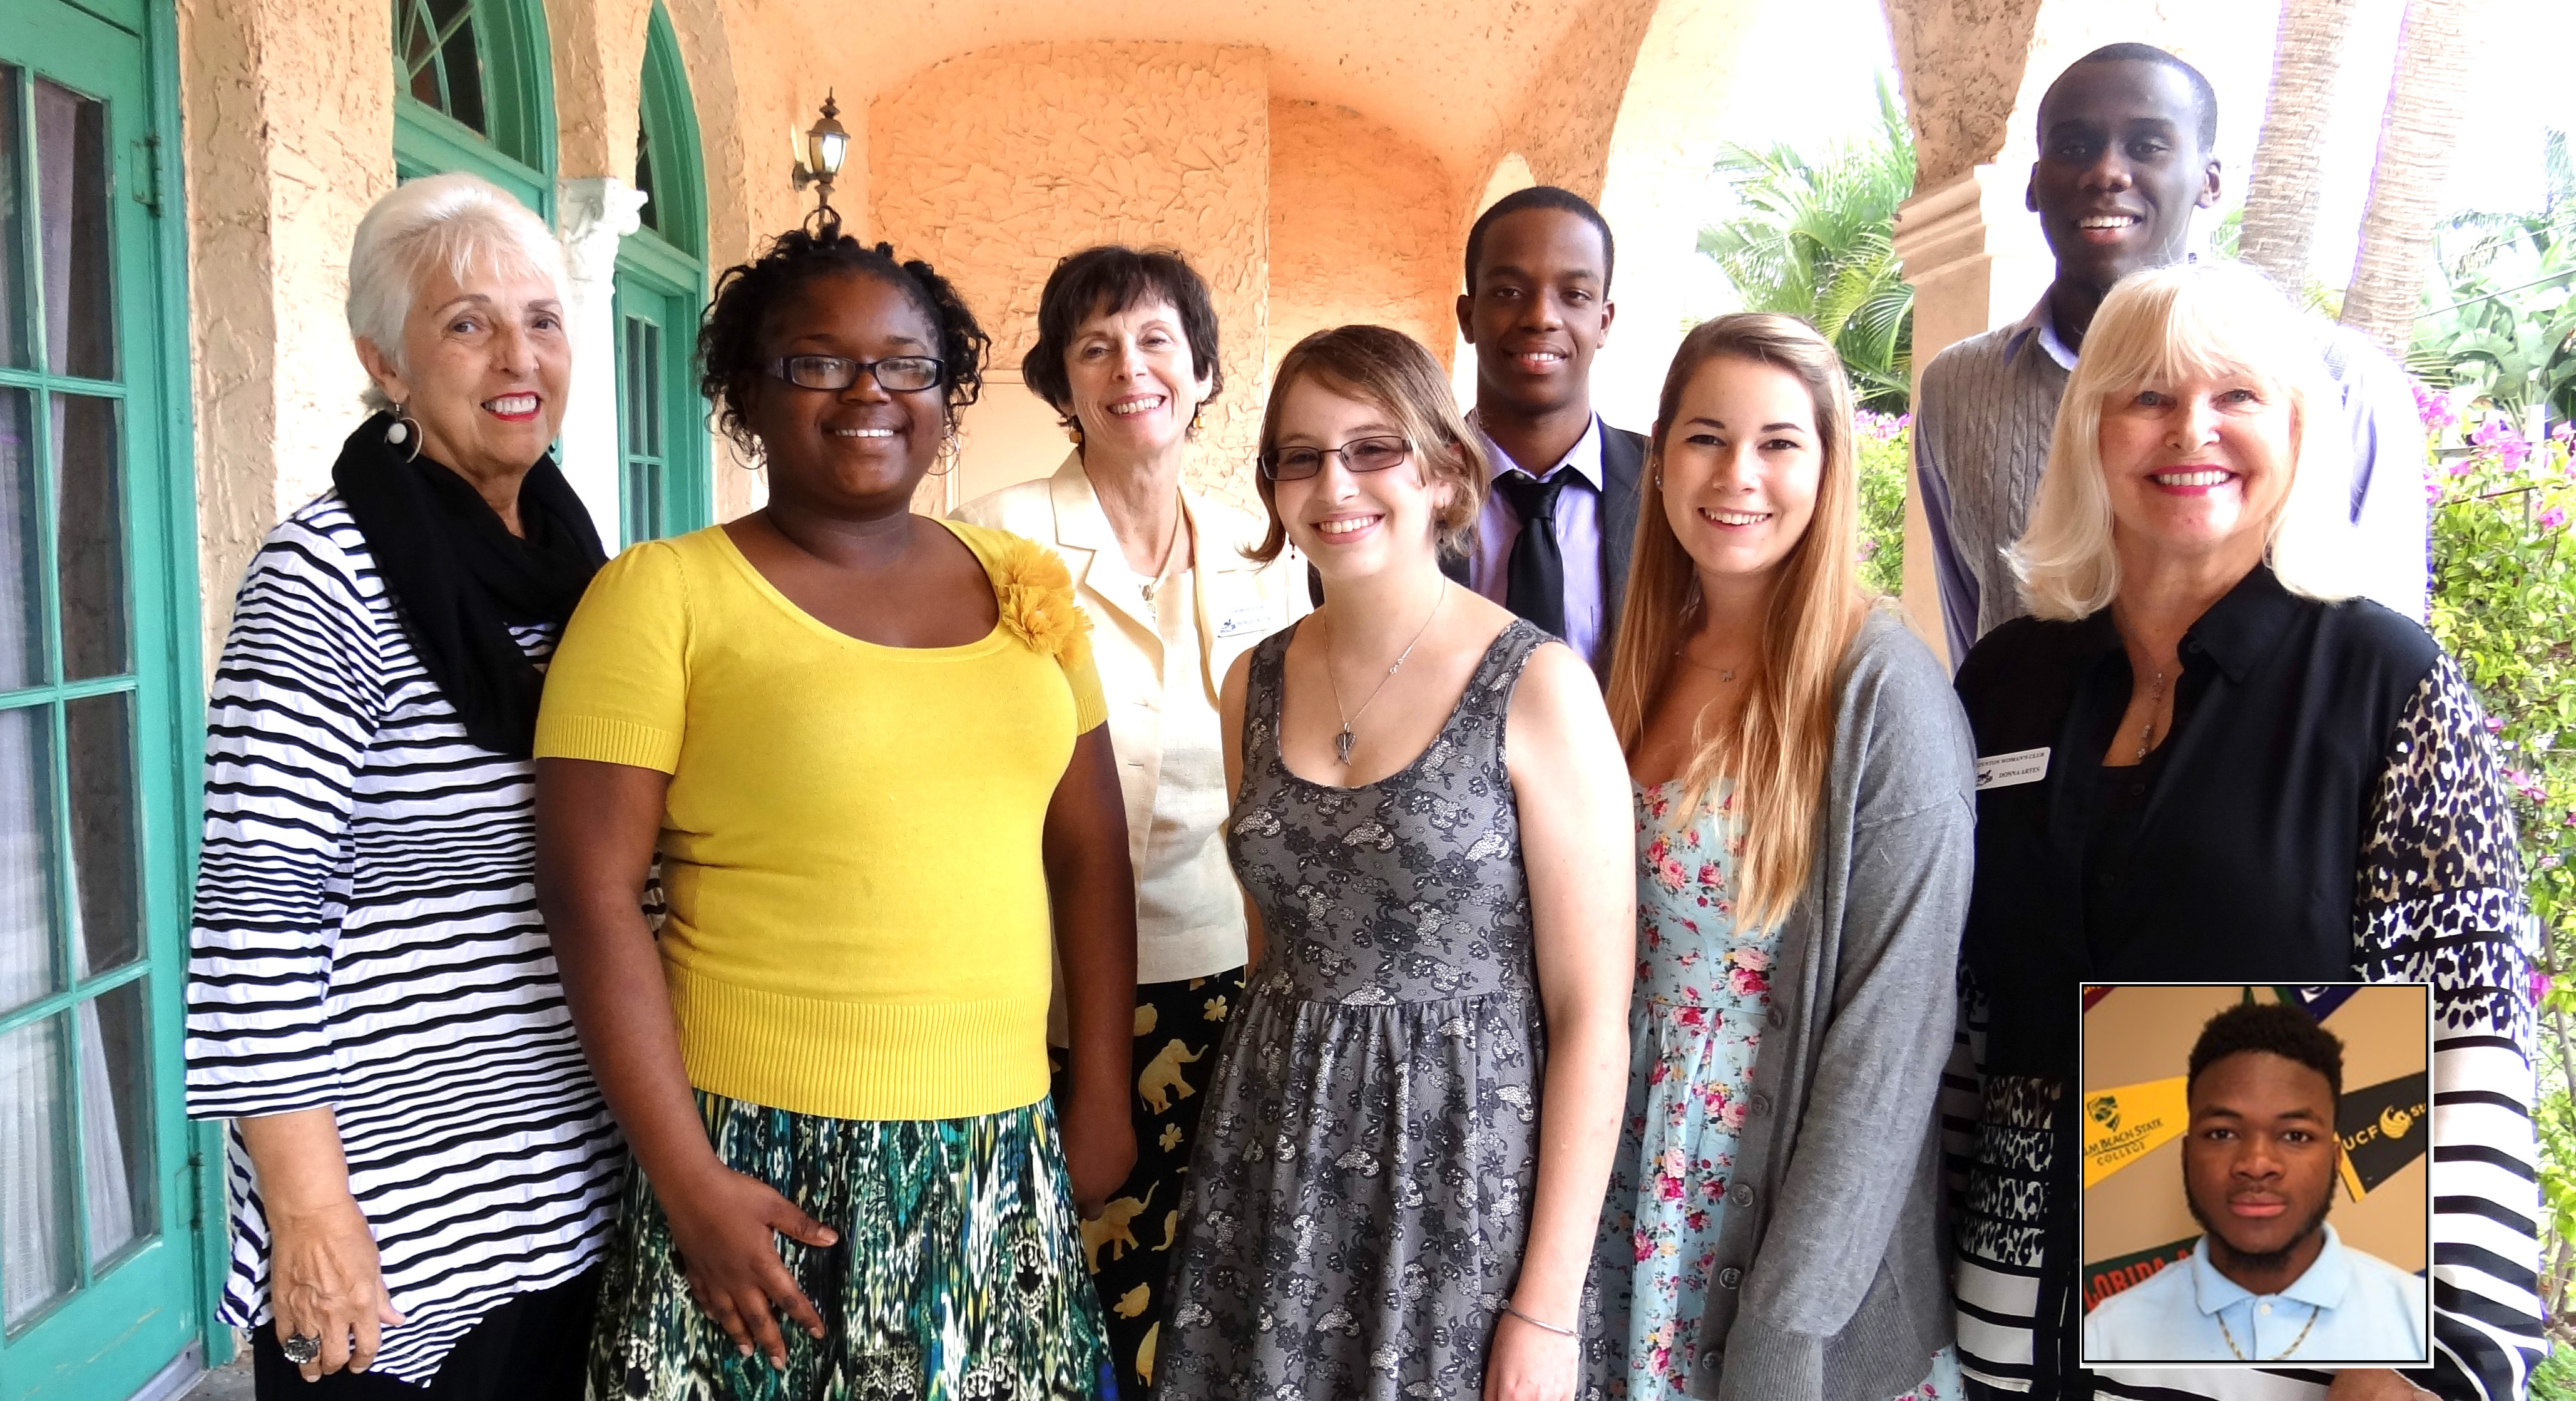 2014-2015 Pictured from the left are: Co-chairman Denise Chamberlain, Julie Nord, BWC President Michele Walter, Courtney Chananie, Giovanny Chery, Brianna Fahrer, Marvel Joseph and Co-chairman Donna Artes. Inset: Sebastien Edmond who was not at the luncheon.